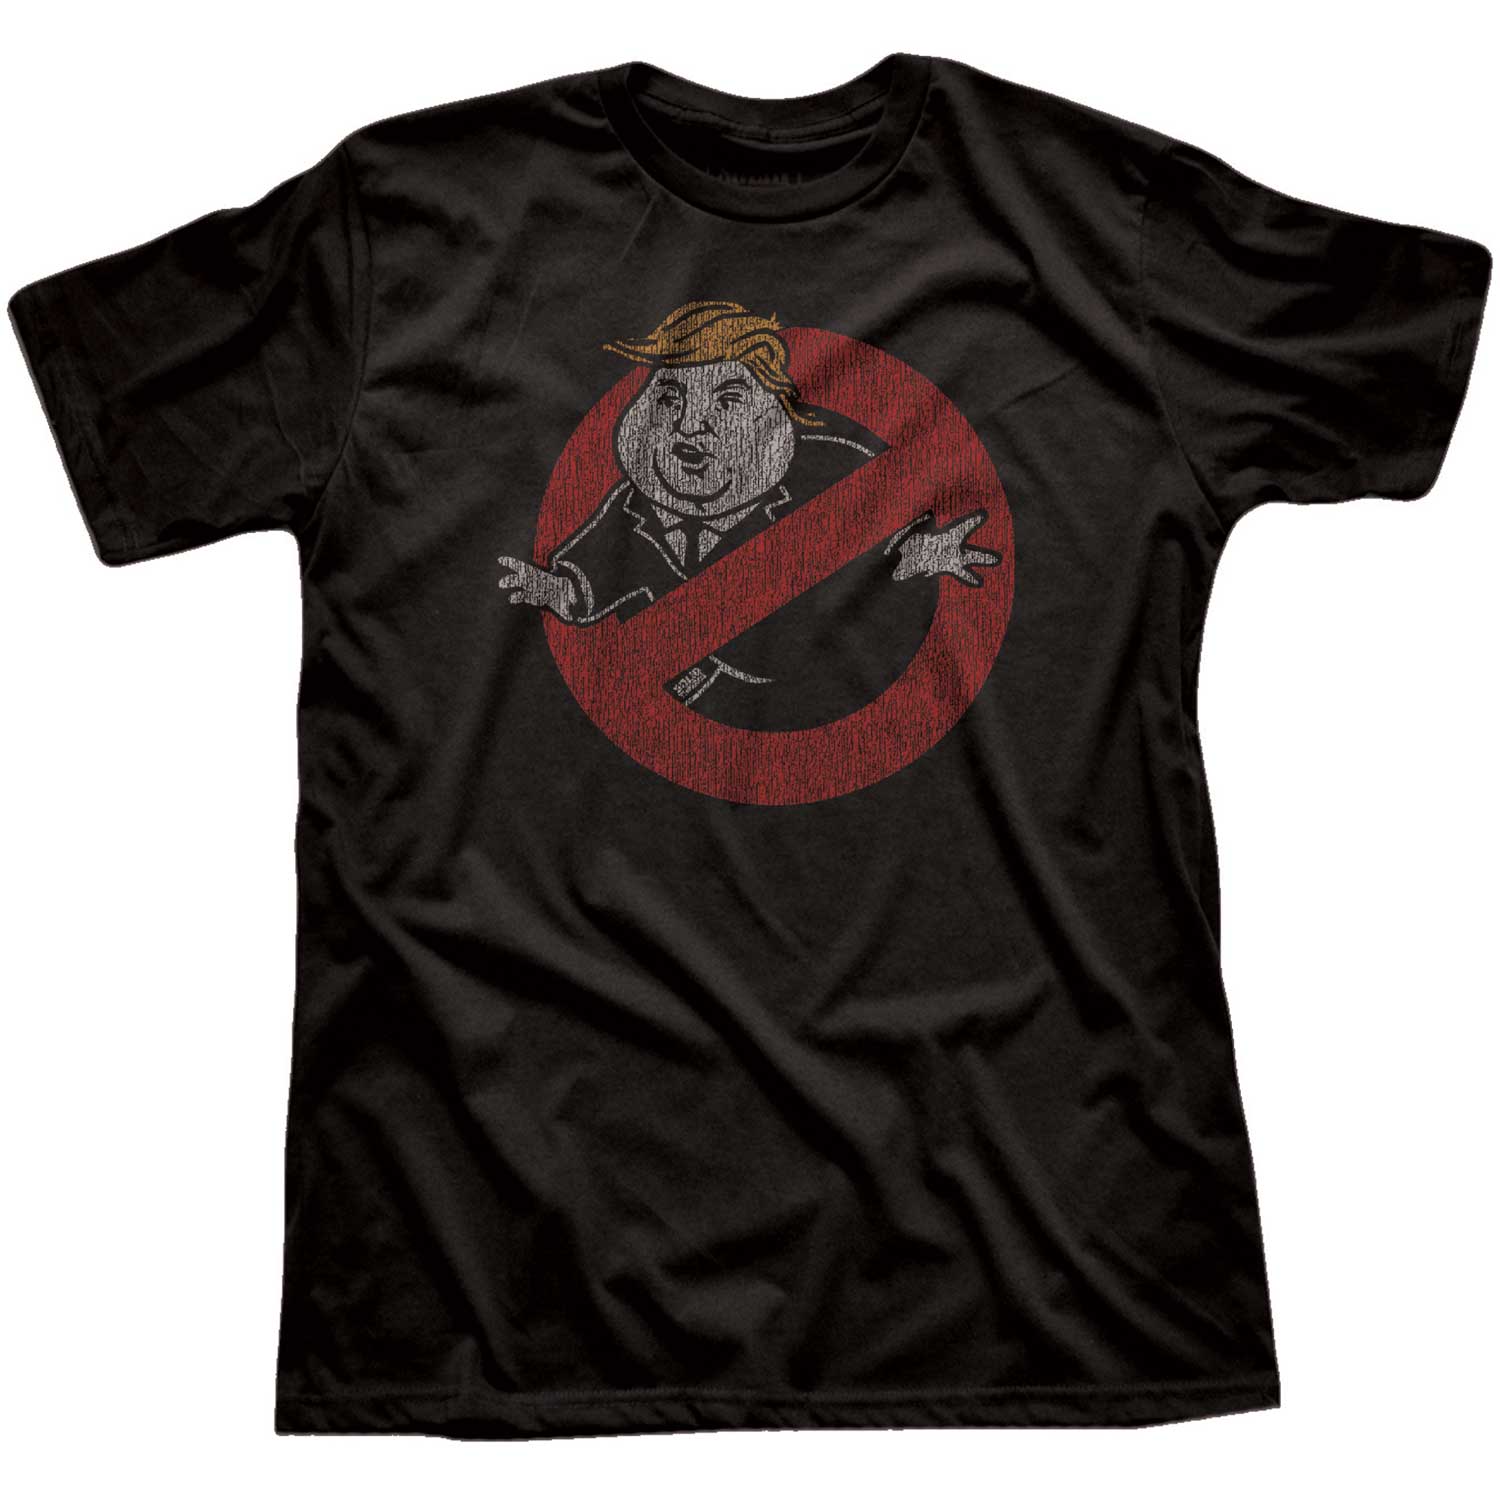 Men's Trump Busters Vintage Graphic T-Shirt | Funny Political Villian Black Tee | Solid Threads